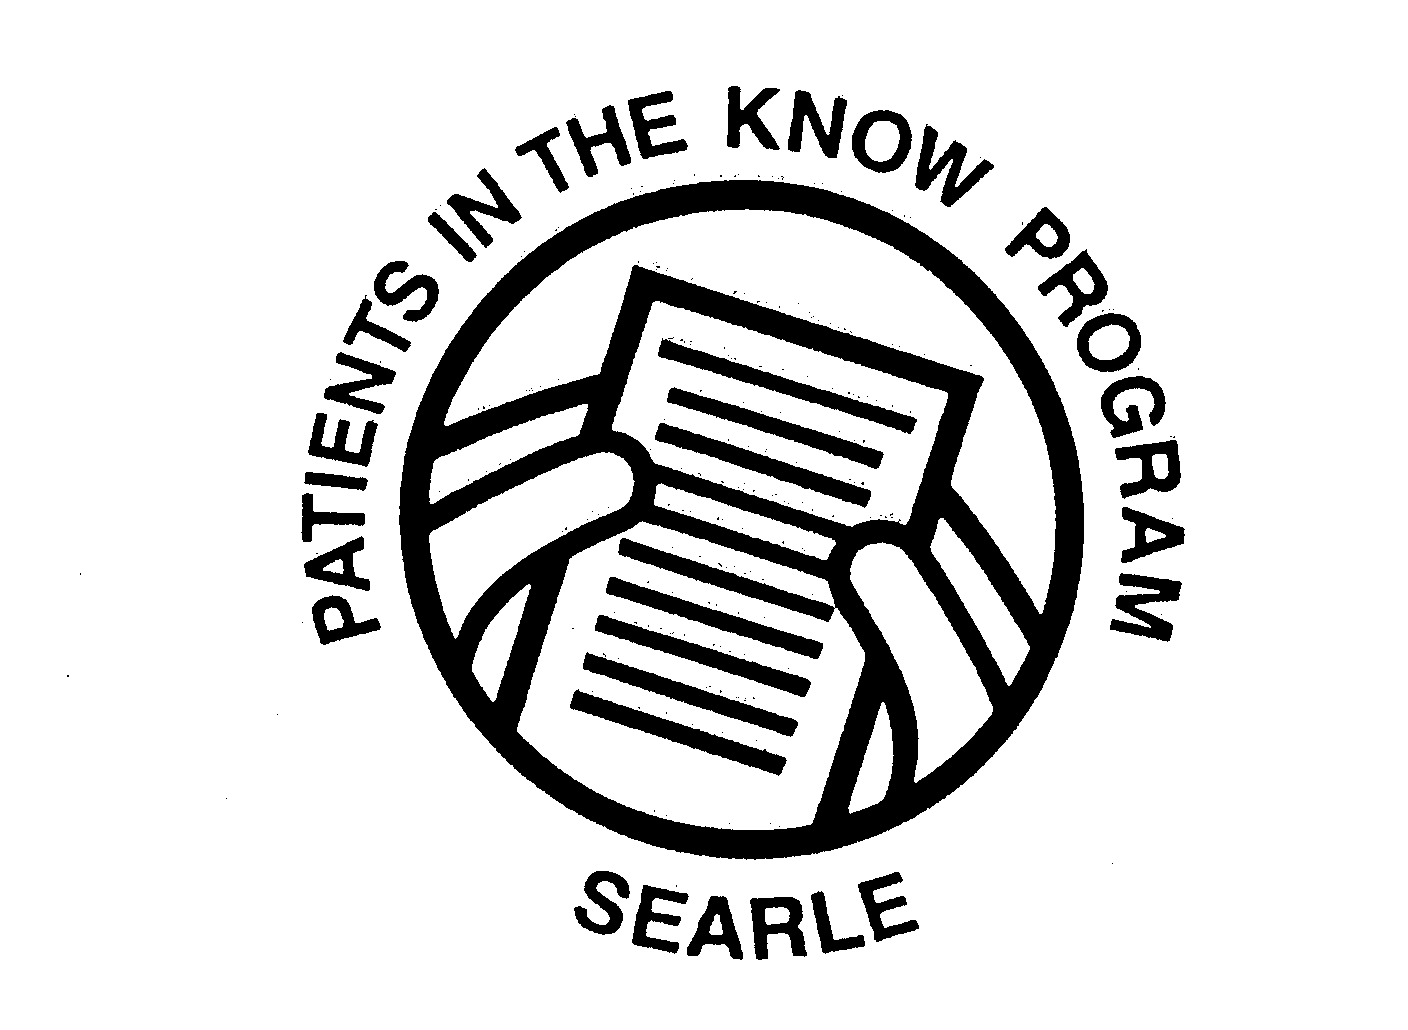  PATIENTS IN THE KNOW PROGRAM SEARLE